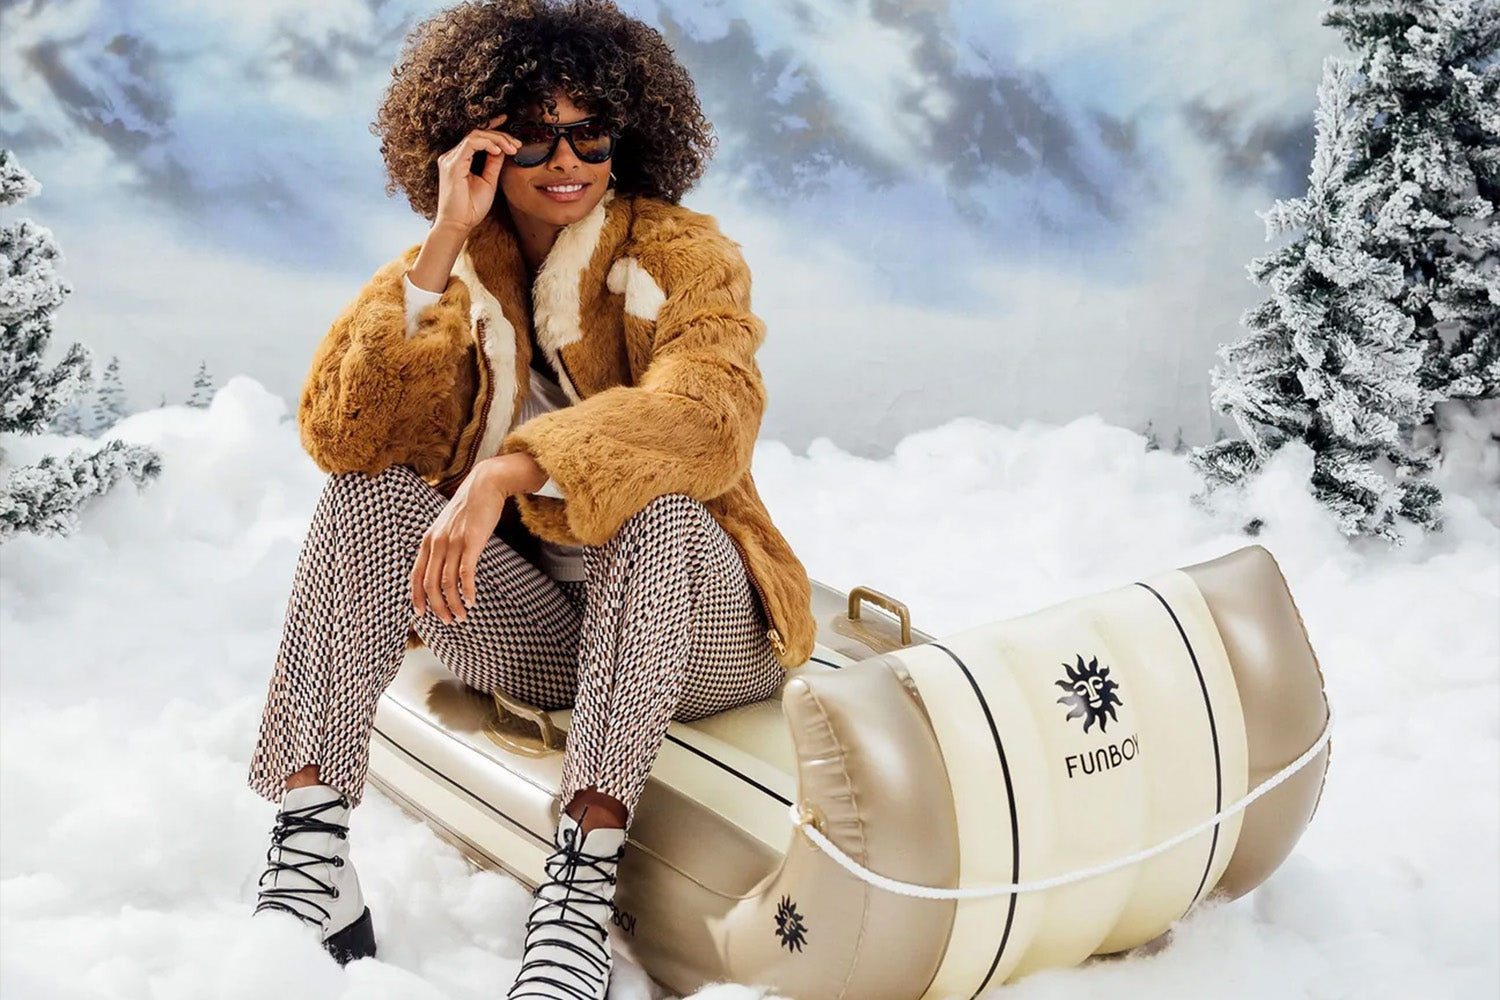 Winter Party Outfits: What To Wear Without Freezing - FUNBOY